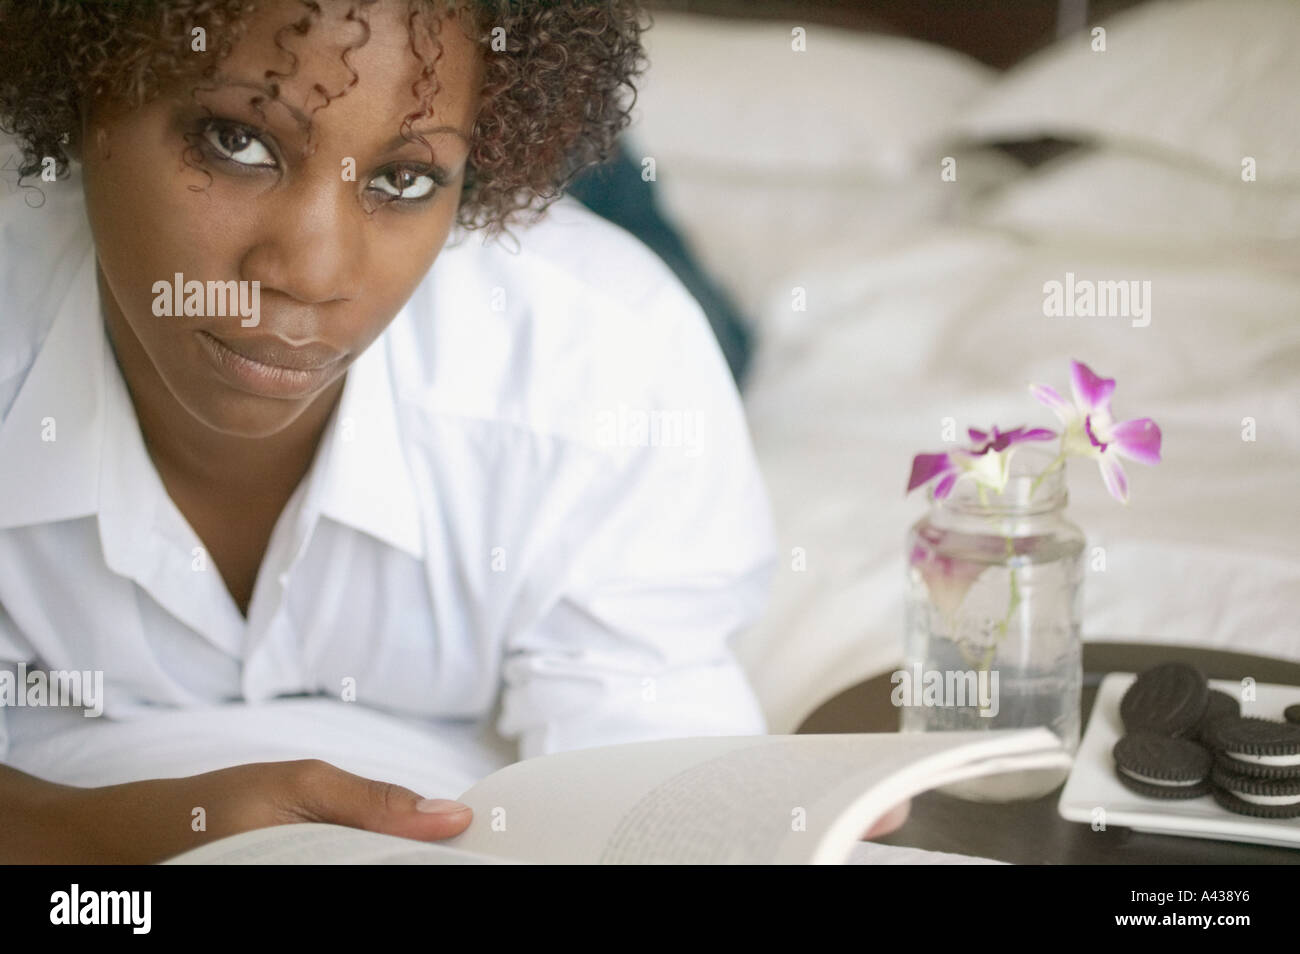 Portrait of woman on bed reading book Stock Photo